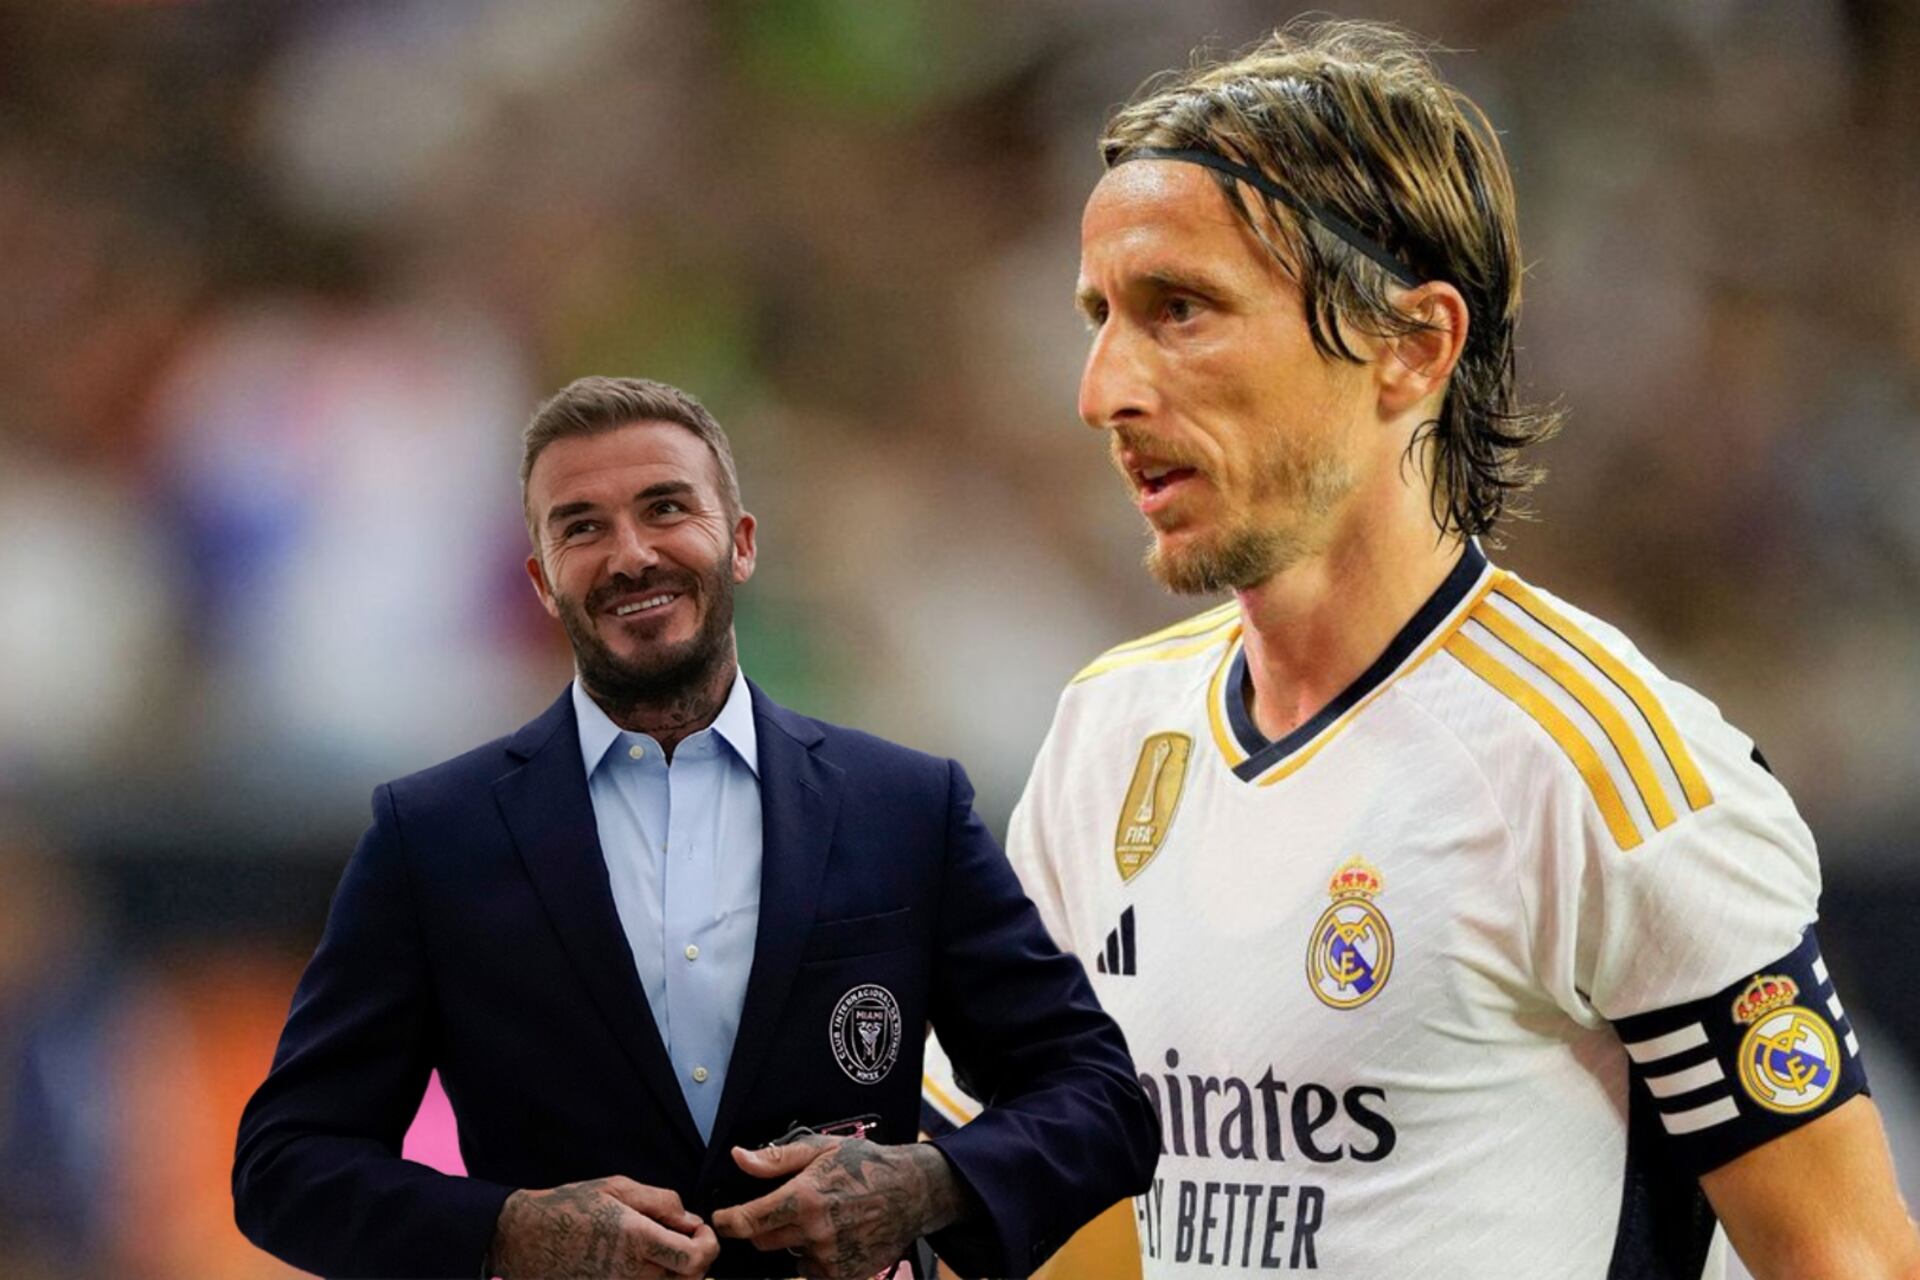 Modric's decision about his future at Real Madrid, Beckham and Inter Miami are aware